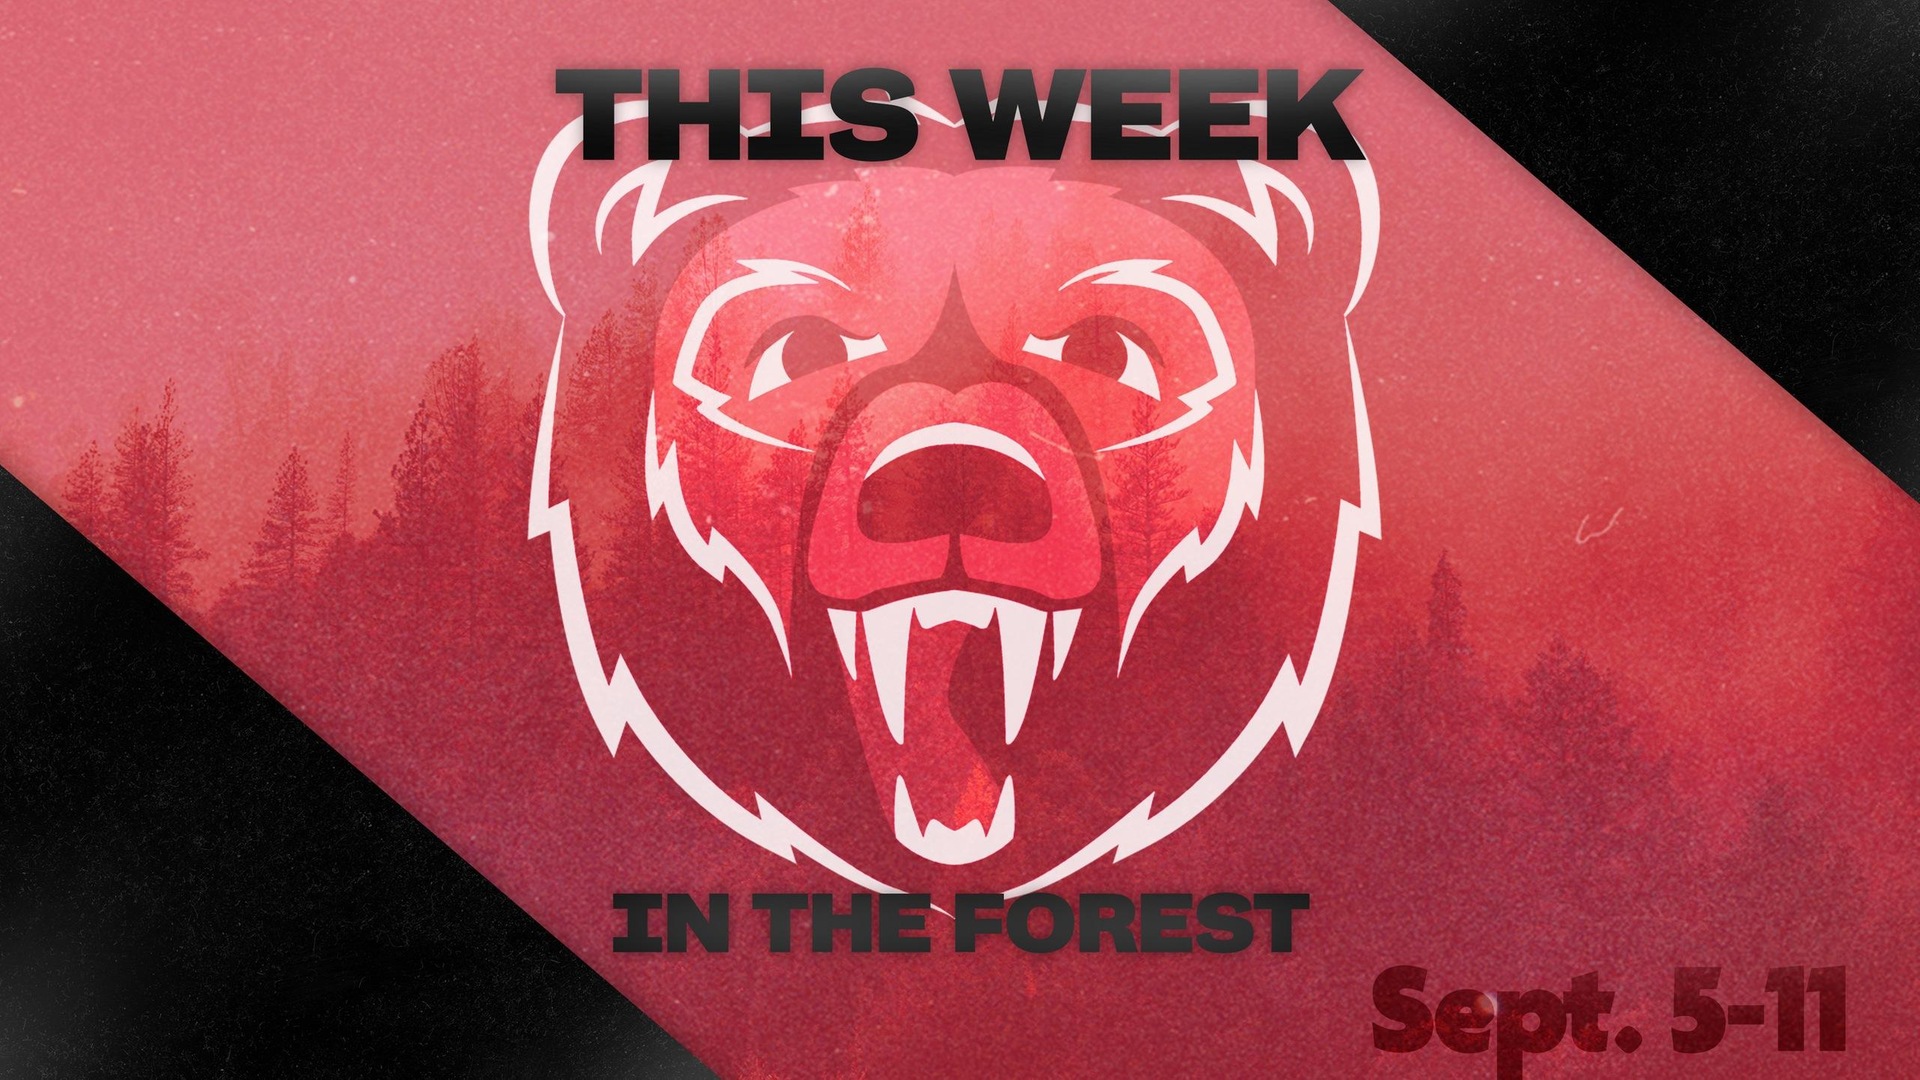 This Week in the Forest: Sept. 5-11